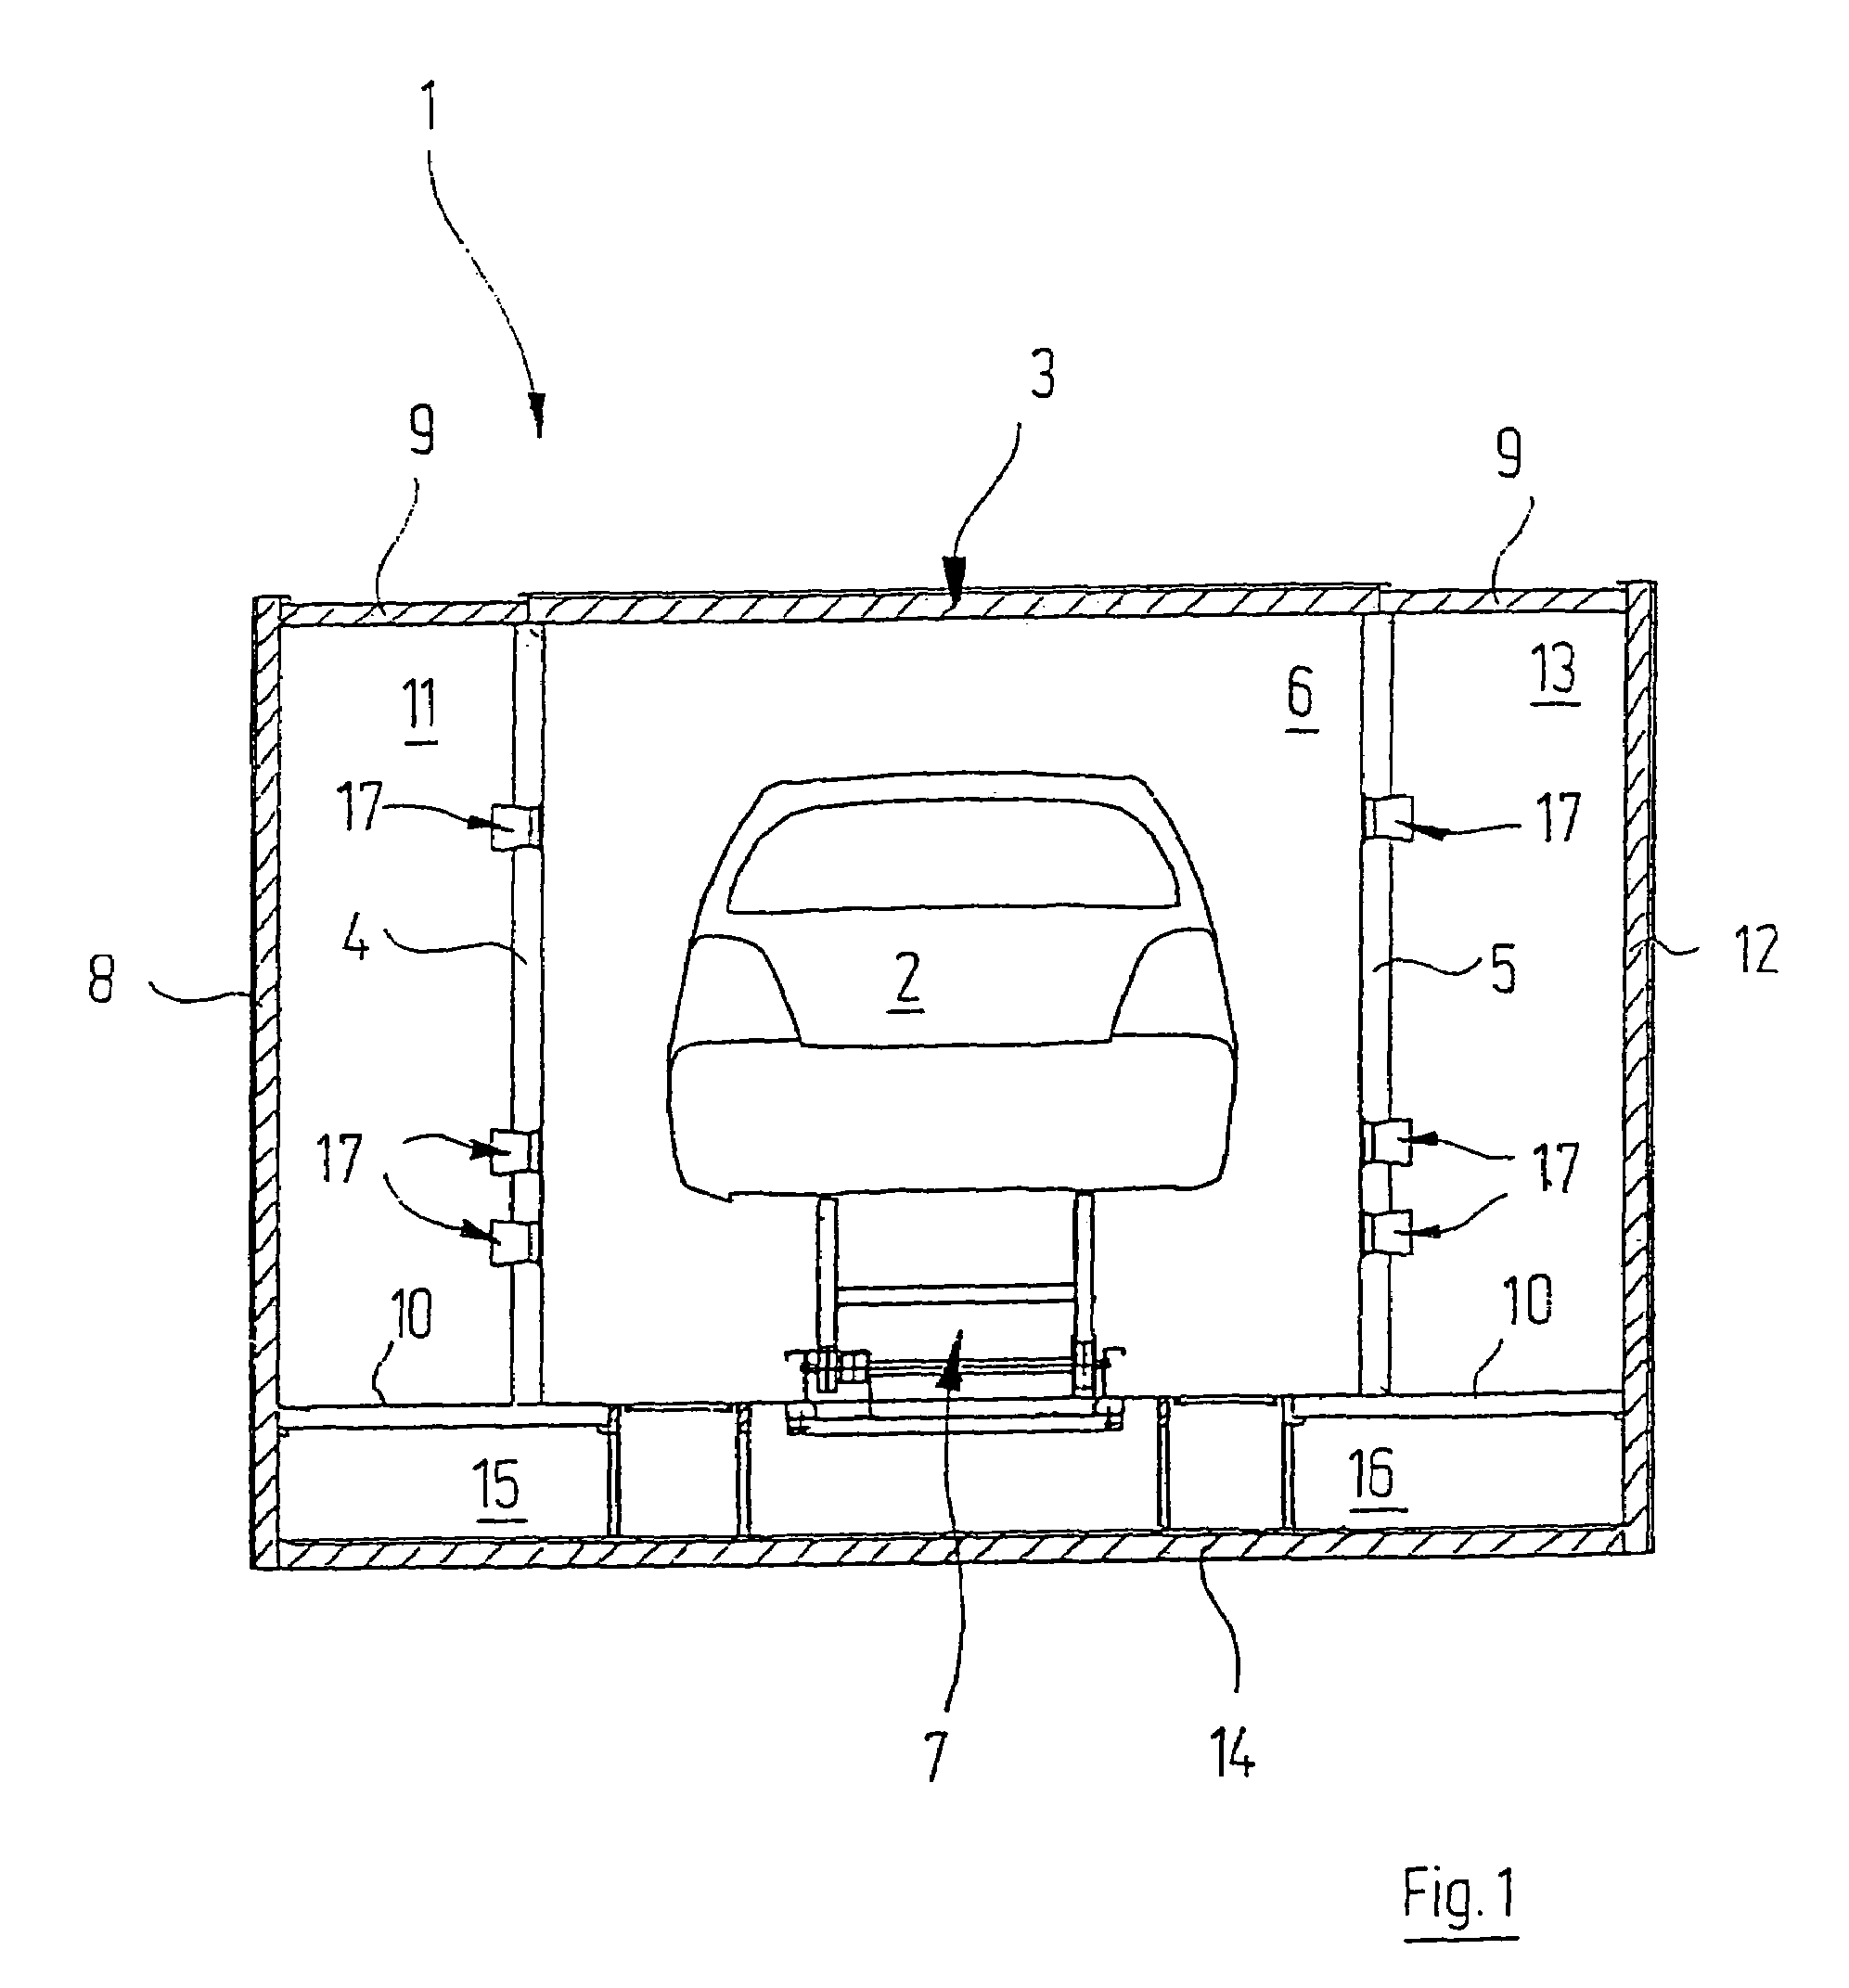 Apparatus for treating articles with at least one tempered, directed air jet